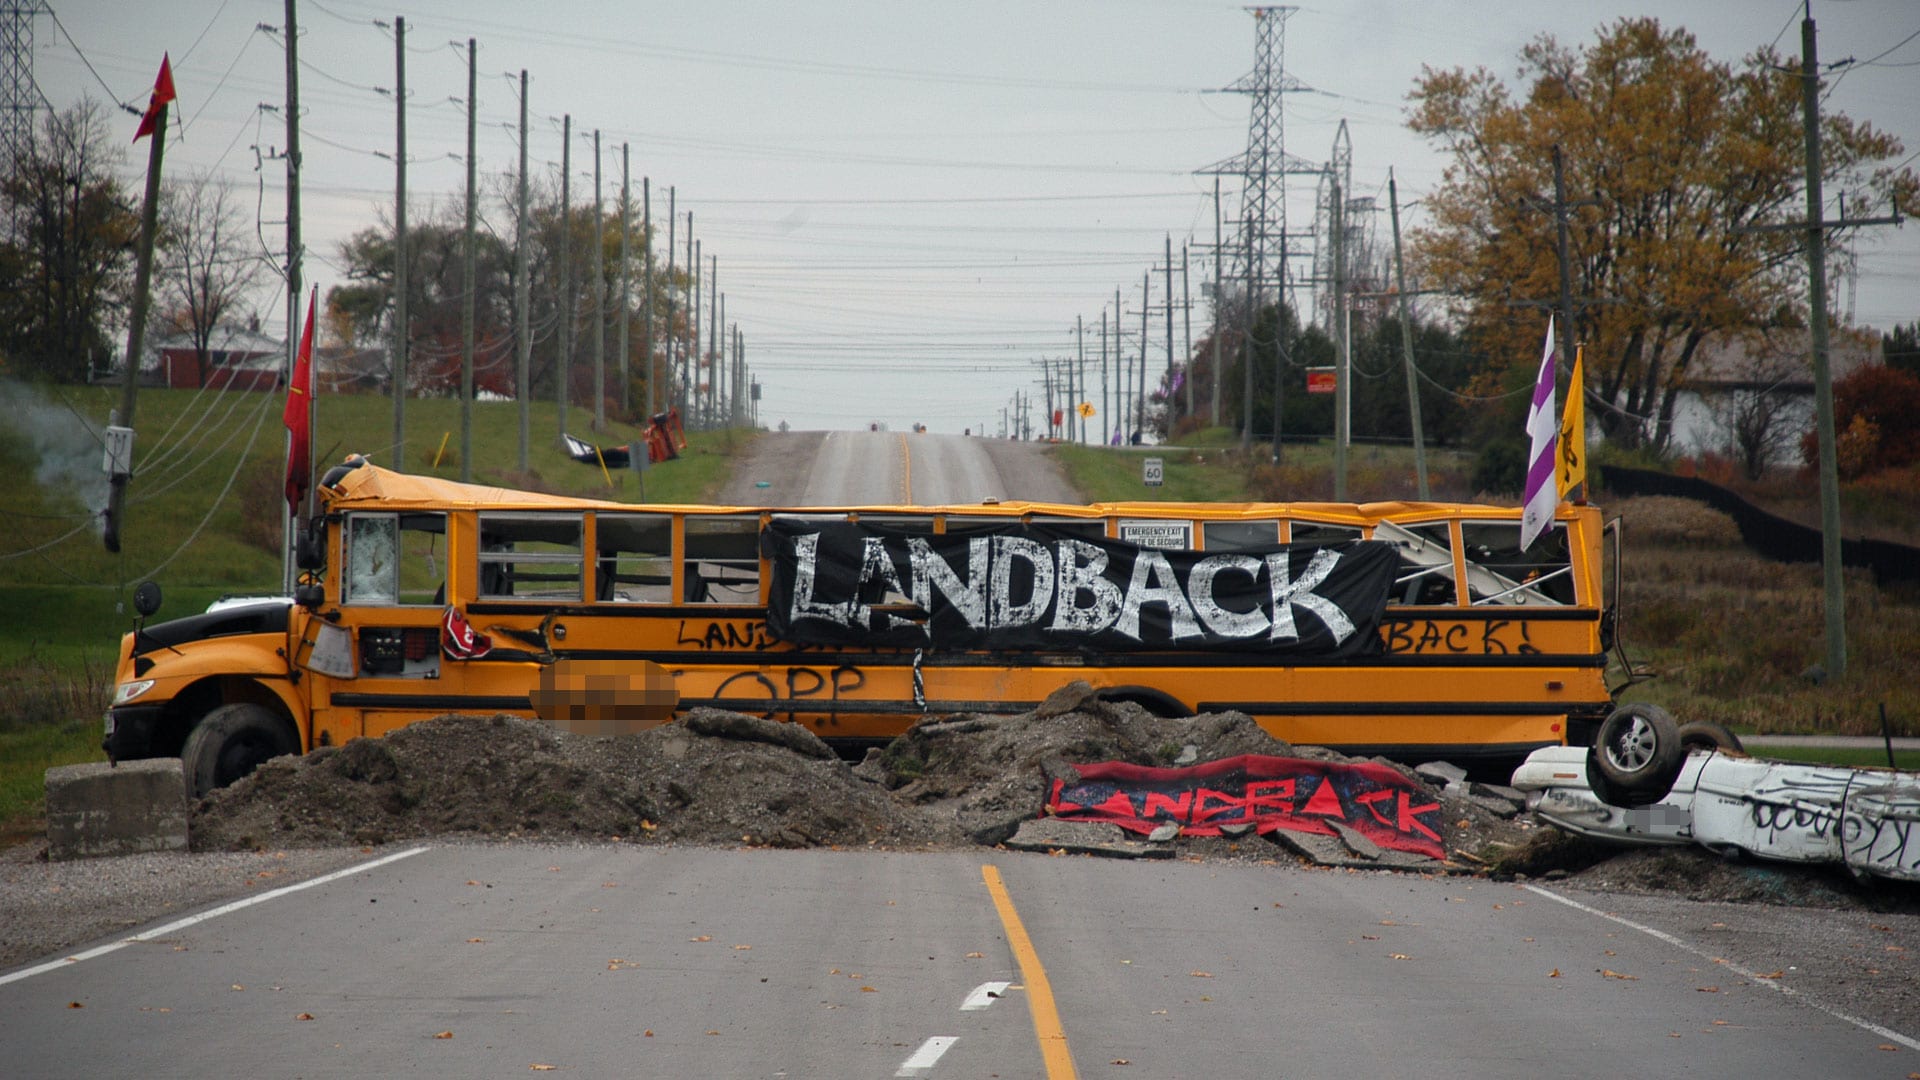 School bus with Land Back banner blocks roadway